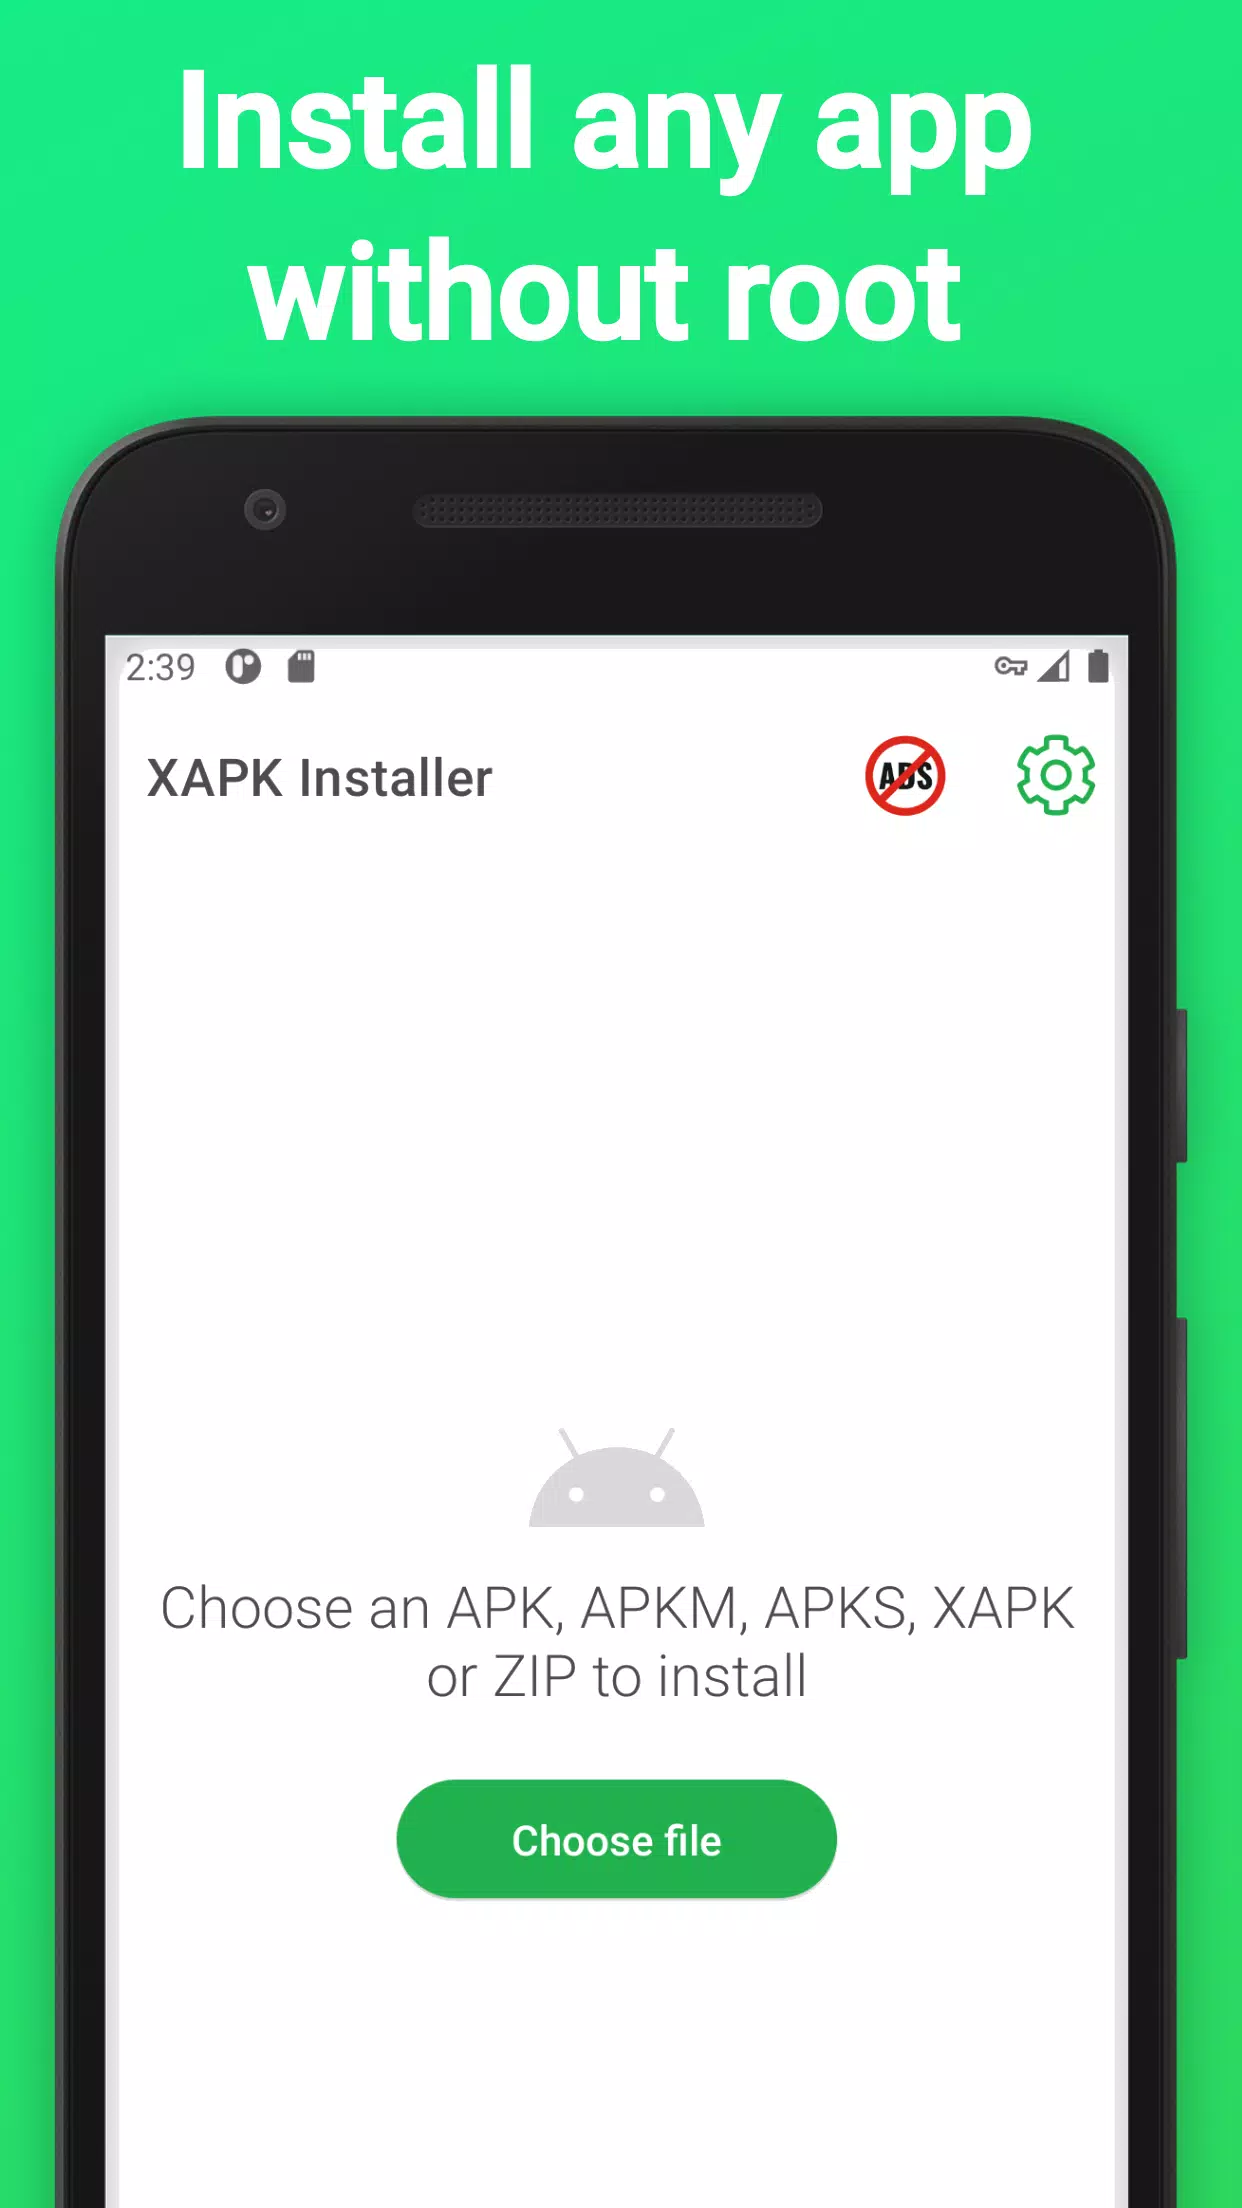 android games free download apk Archives - XAPK Installer